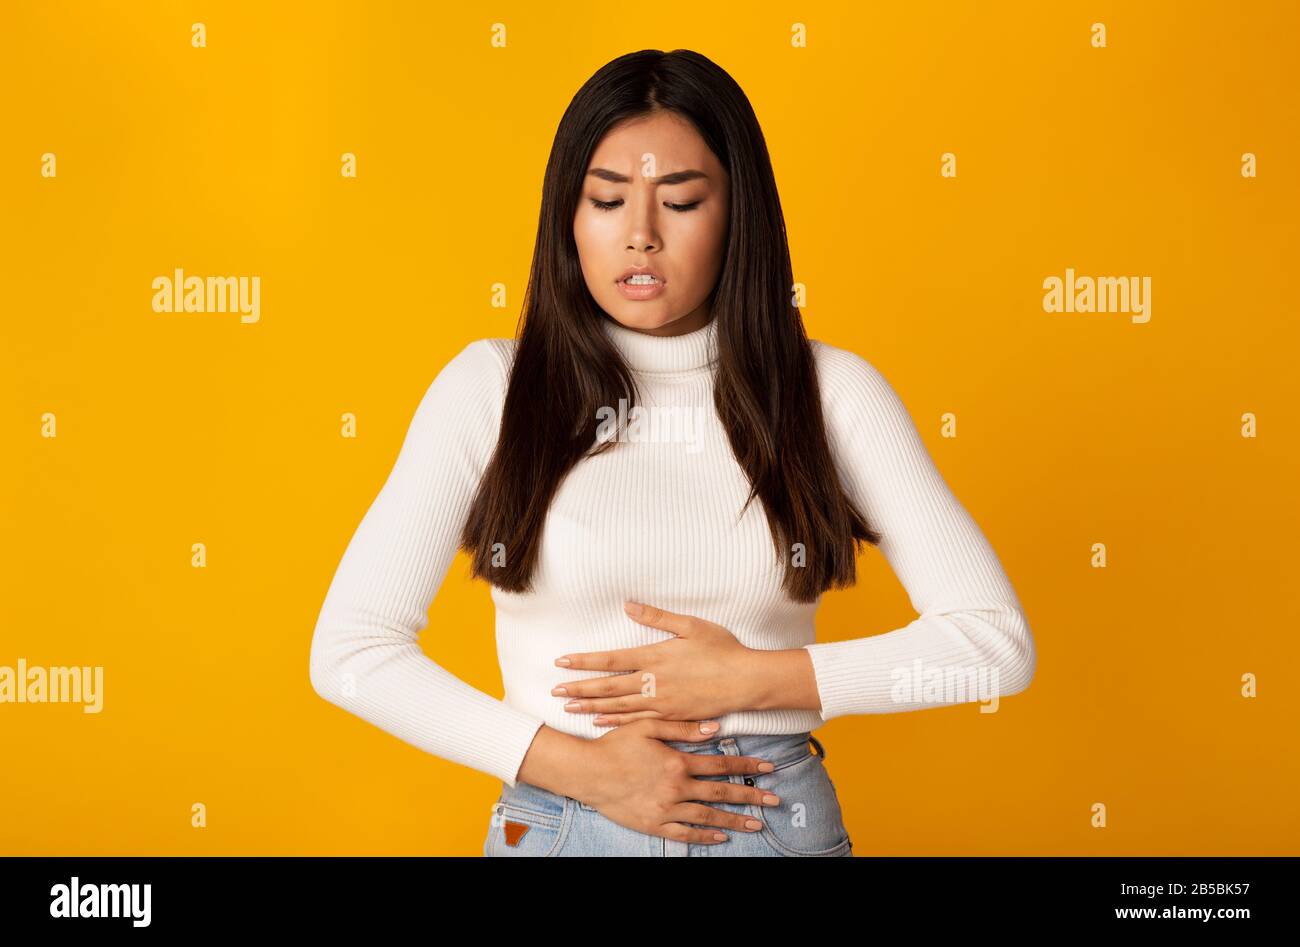 Asian Girl Touching Stomach Standing On Yellow Background Stock Photo